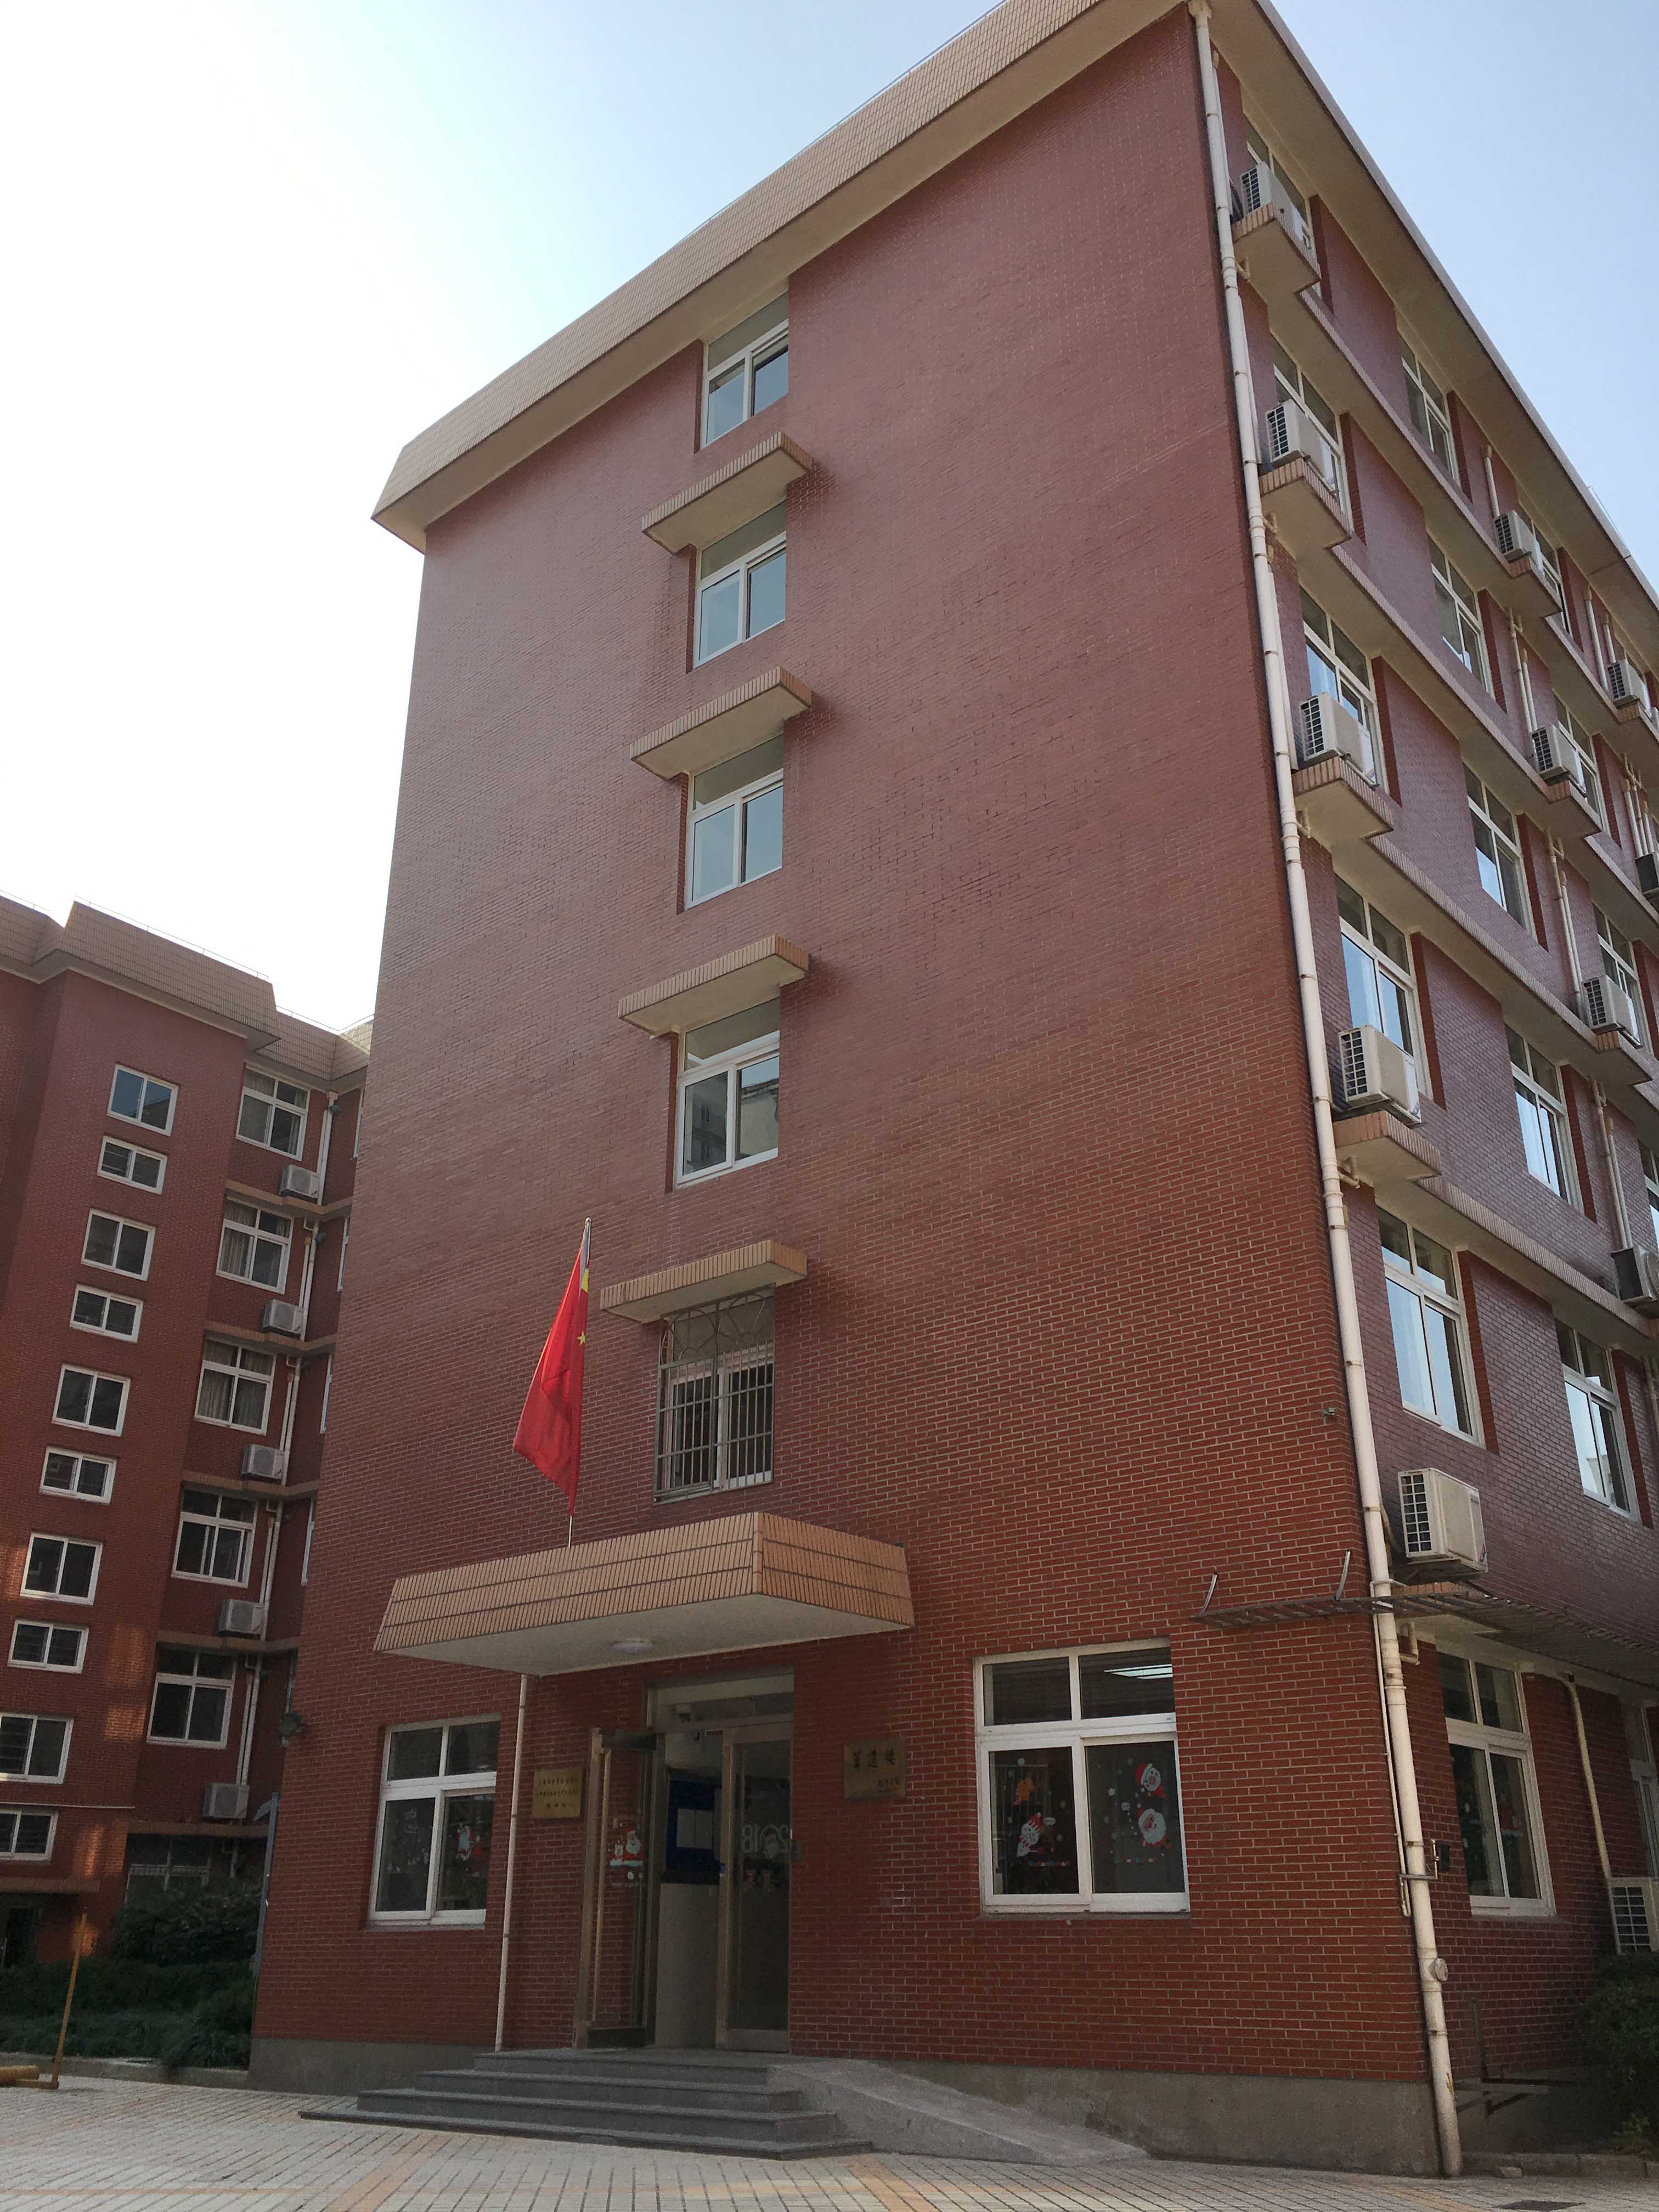 Exterior of single student residence hall in Shanghai, China.